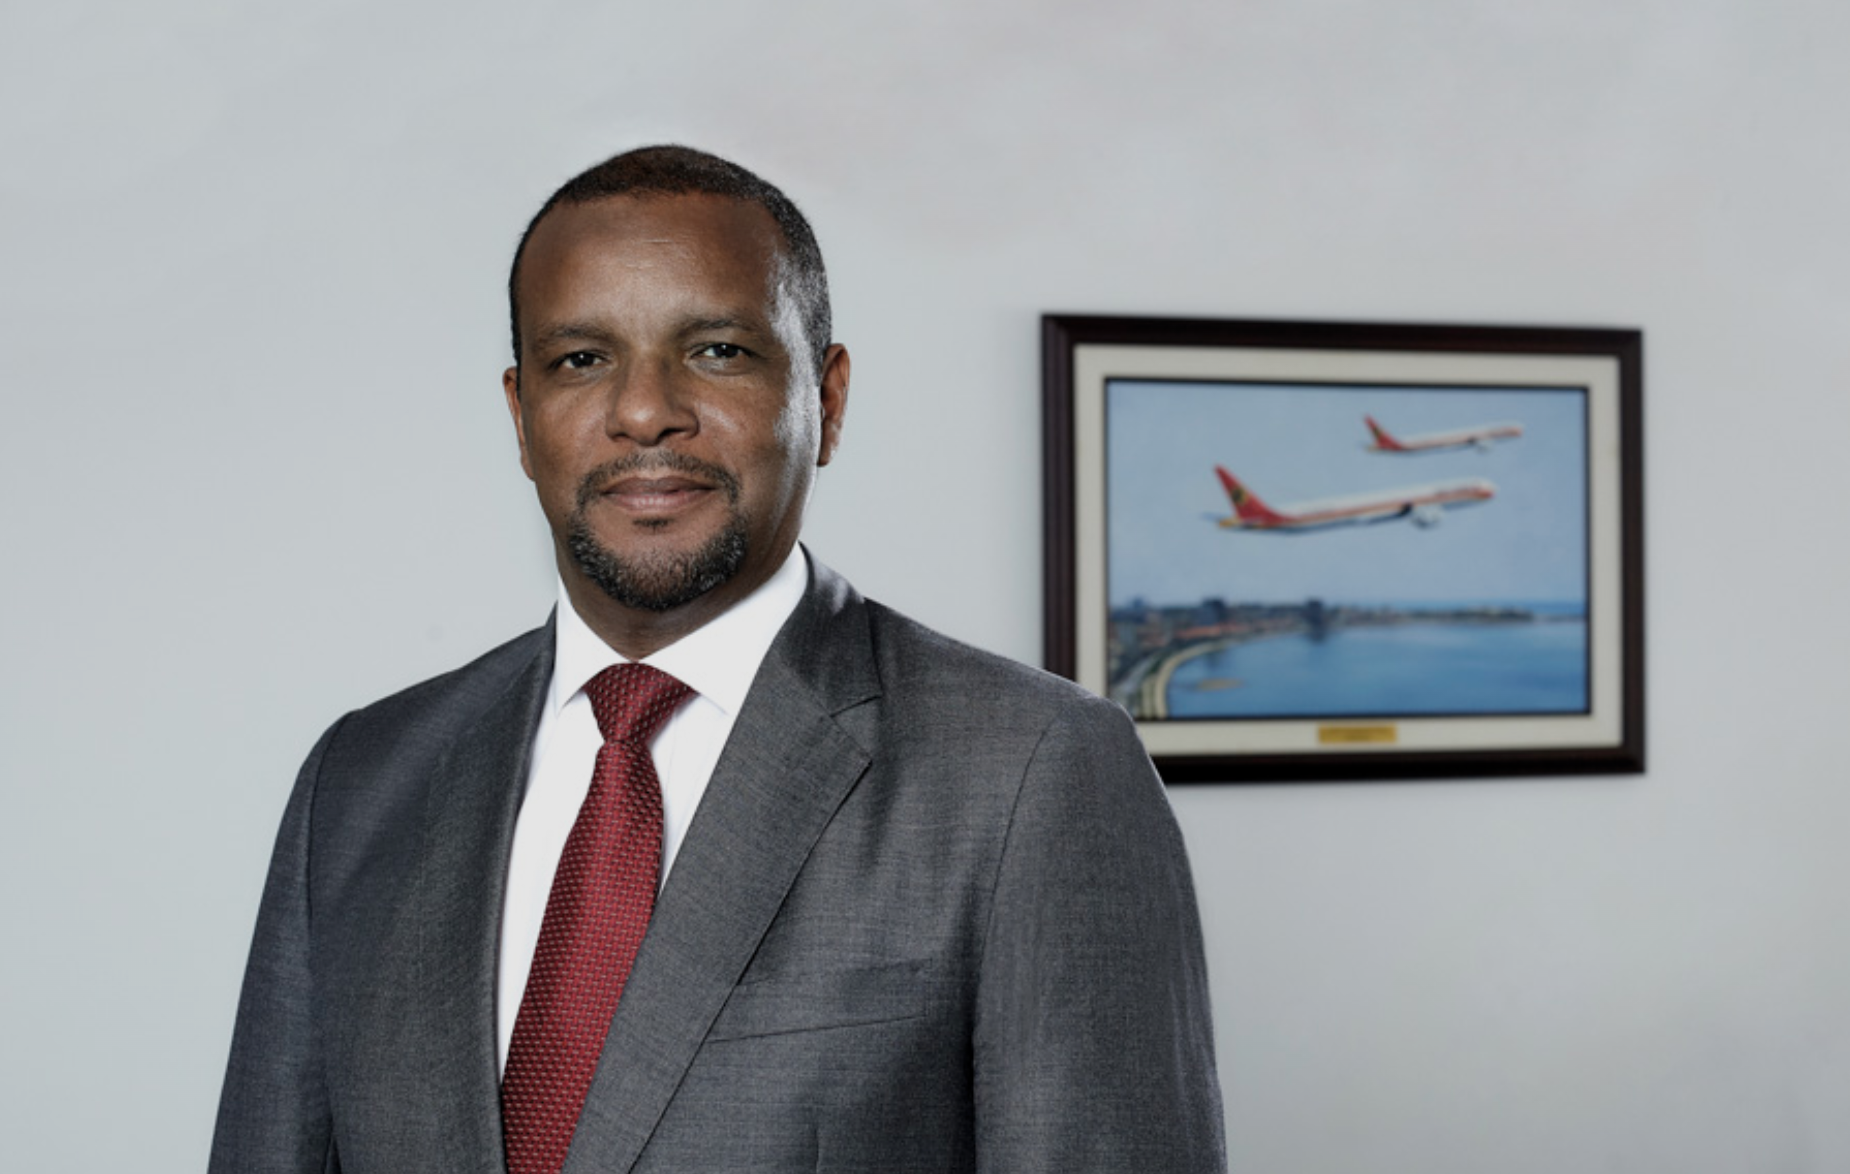 TAAG Angola Airlines CEO Rui Carreira